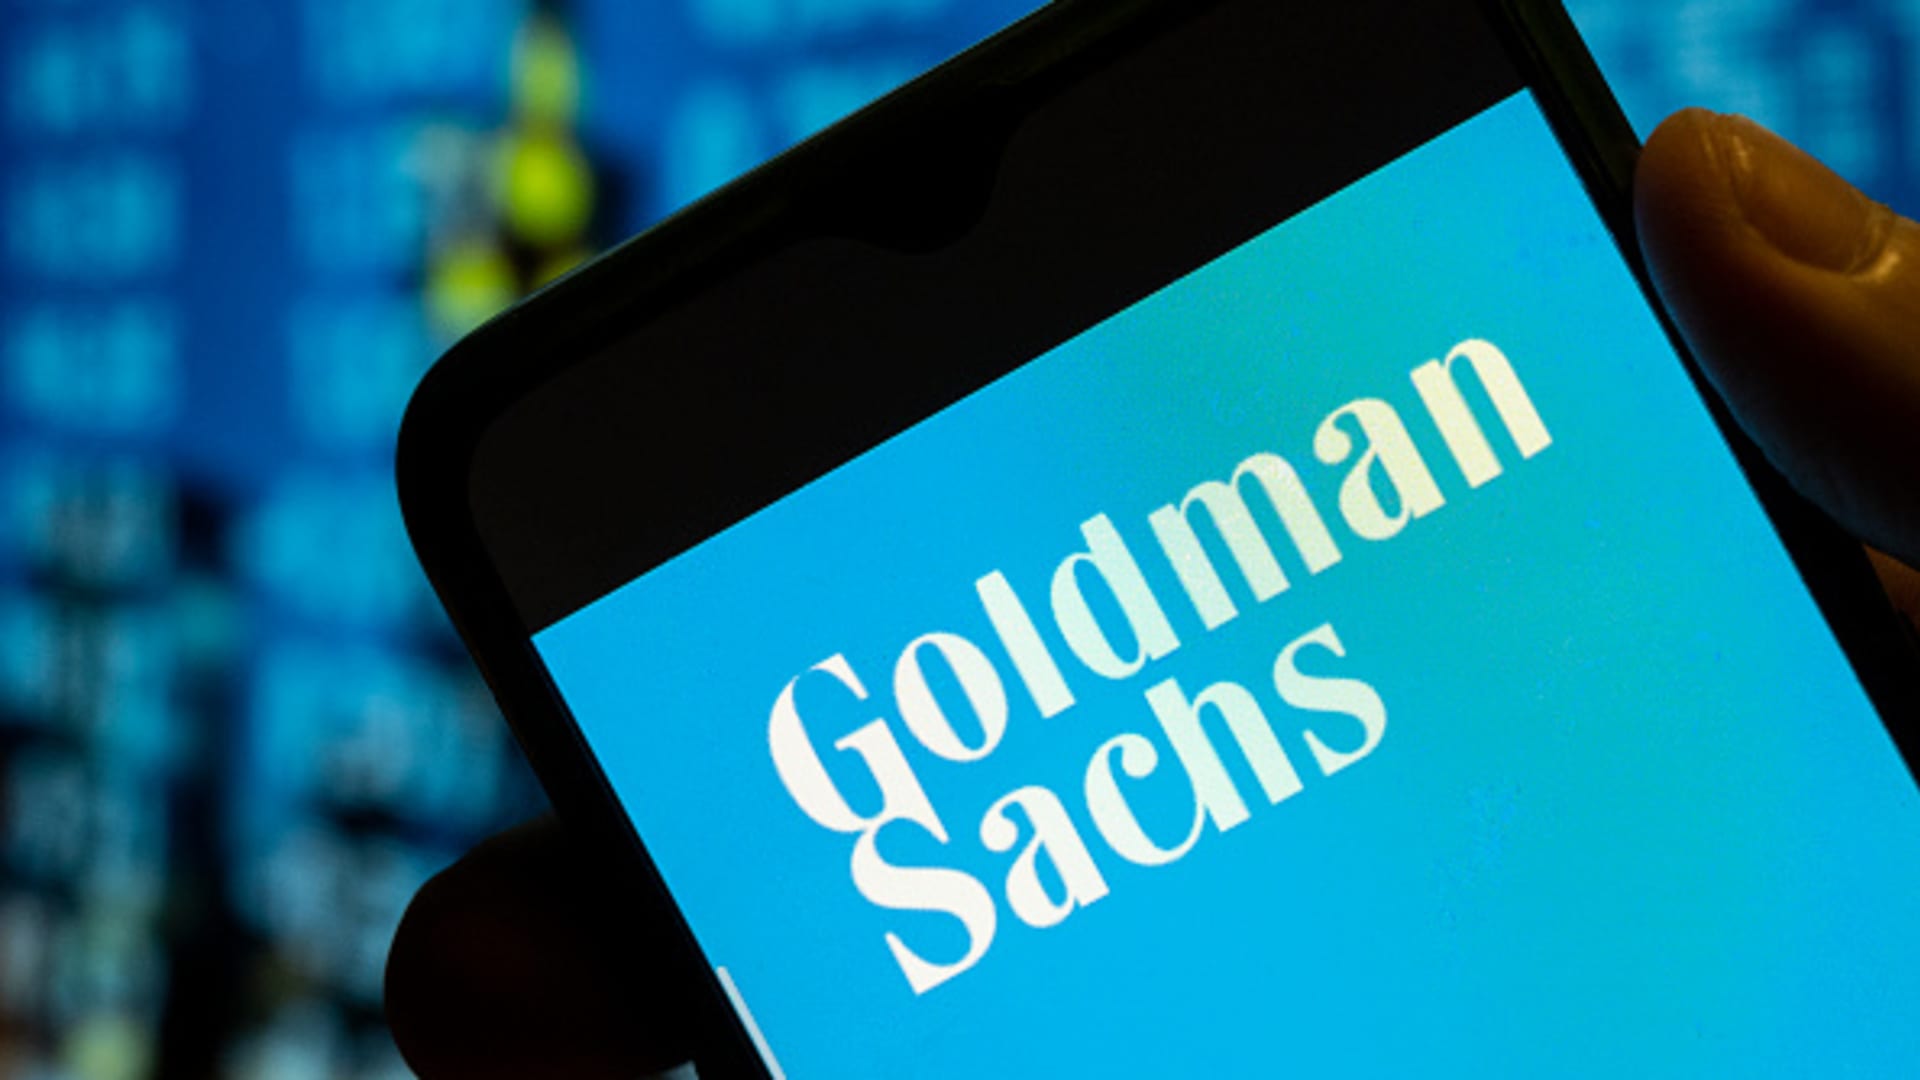 'Harder to find': Goldman Sachs names stocks with growth at a 'reasonable' price â€” and more